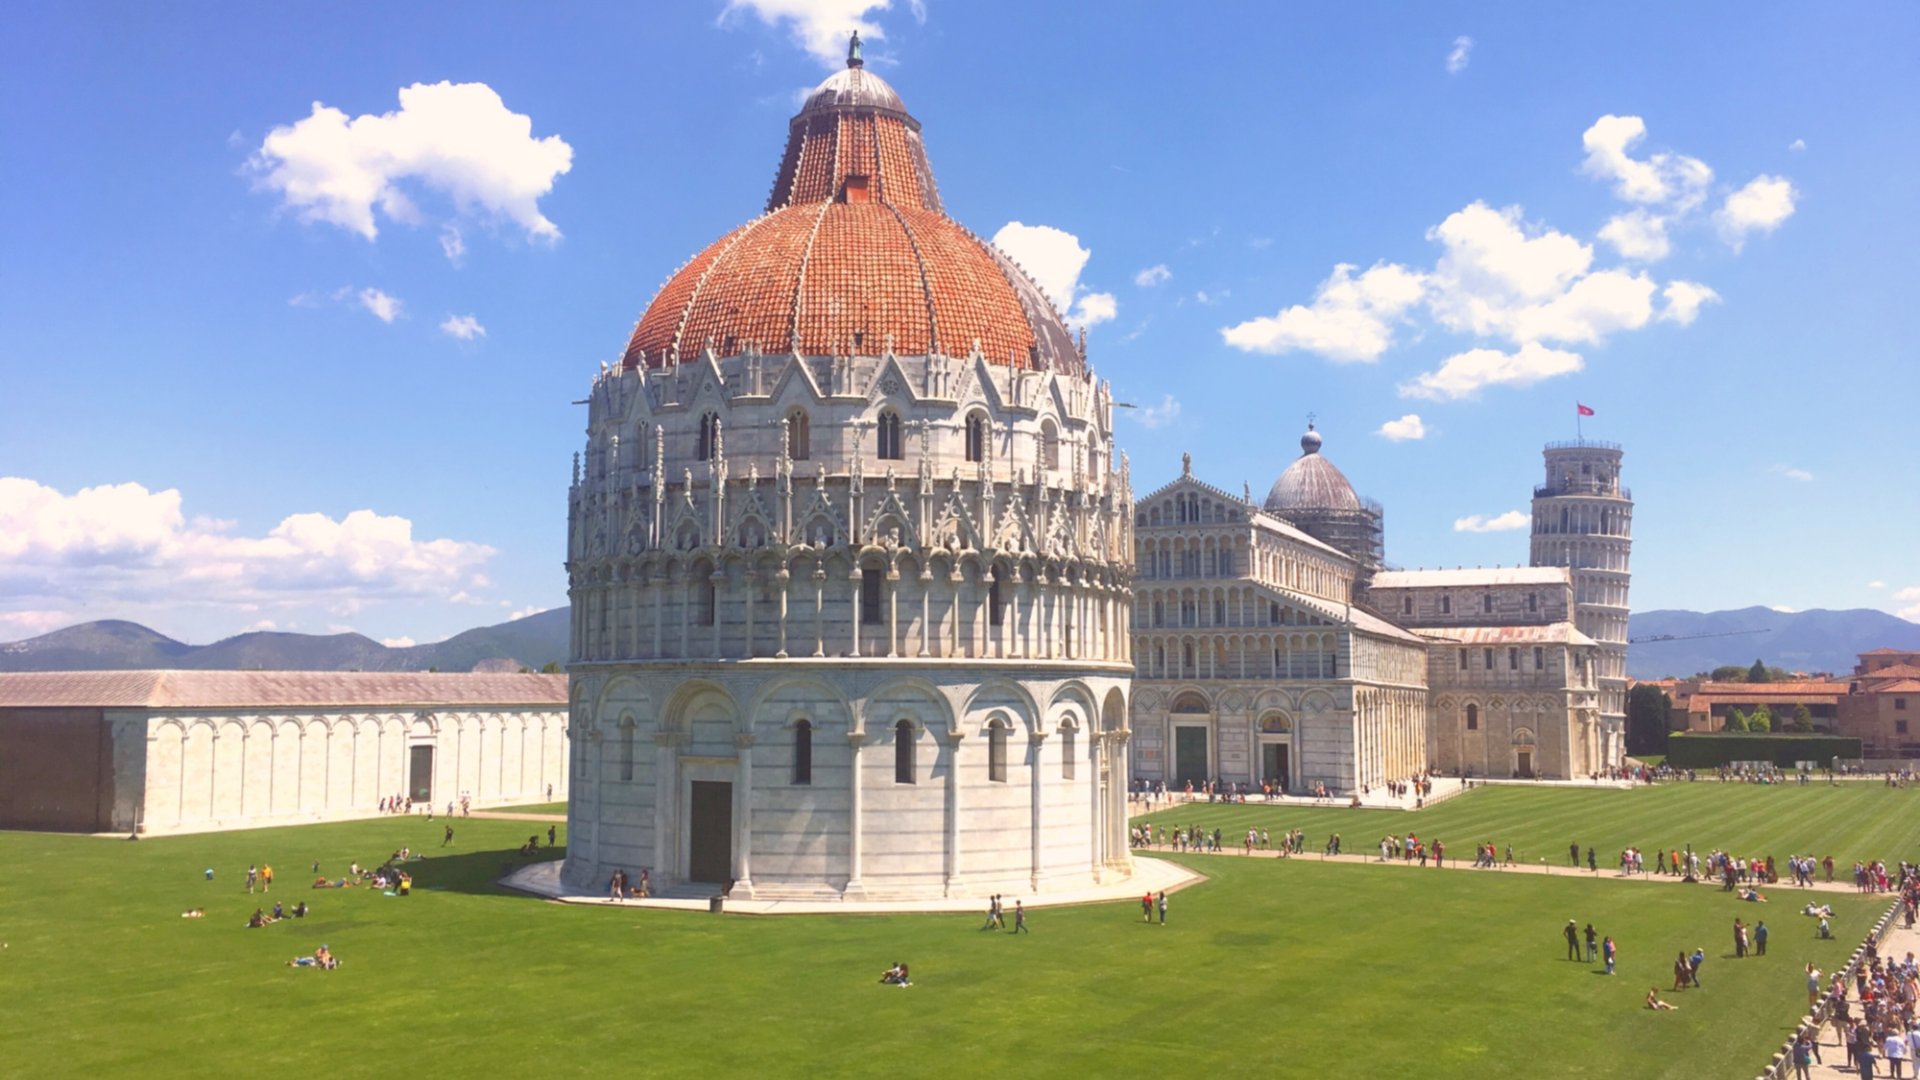 The tour will lead you to the discovery of the Baptistery and the Cathedral, in the wonderful Piazza dei Miracoli in Pisa